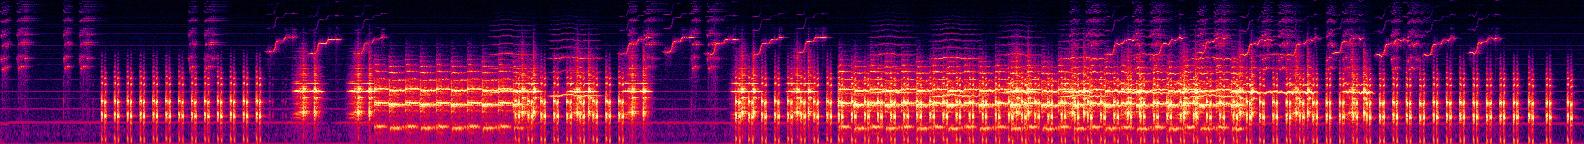 A Game of Chess - 12. Game B - Spectrogram.jpg